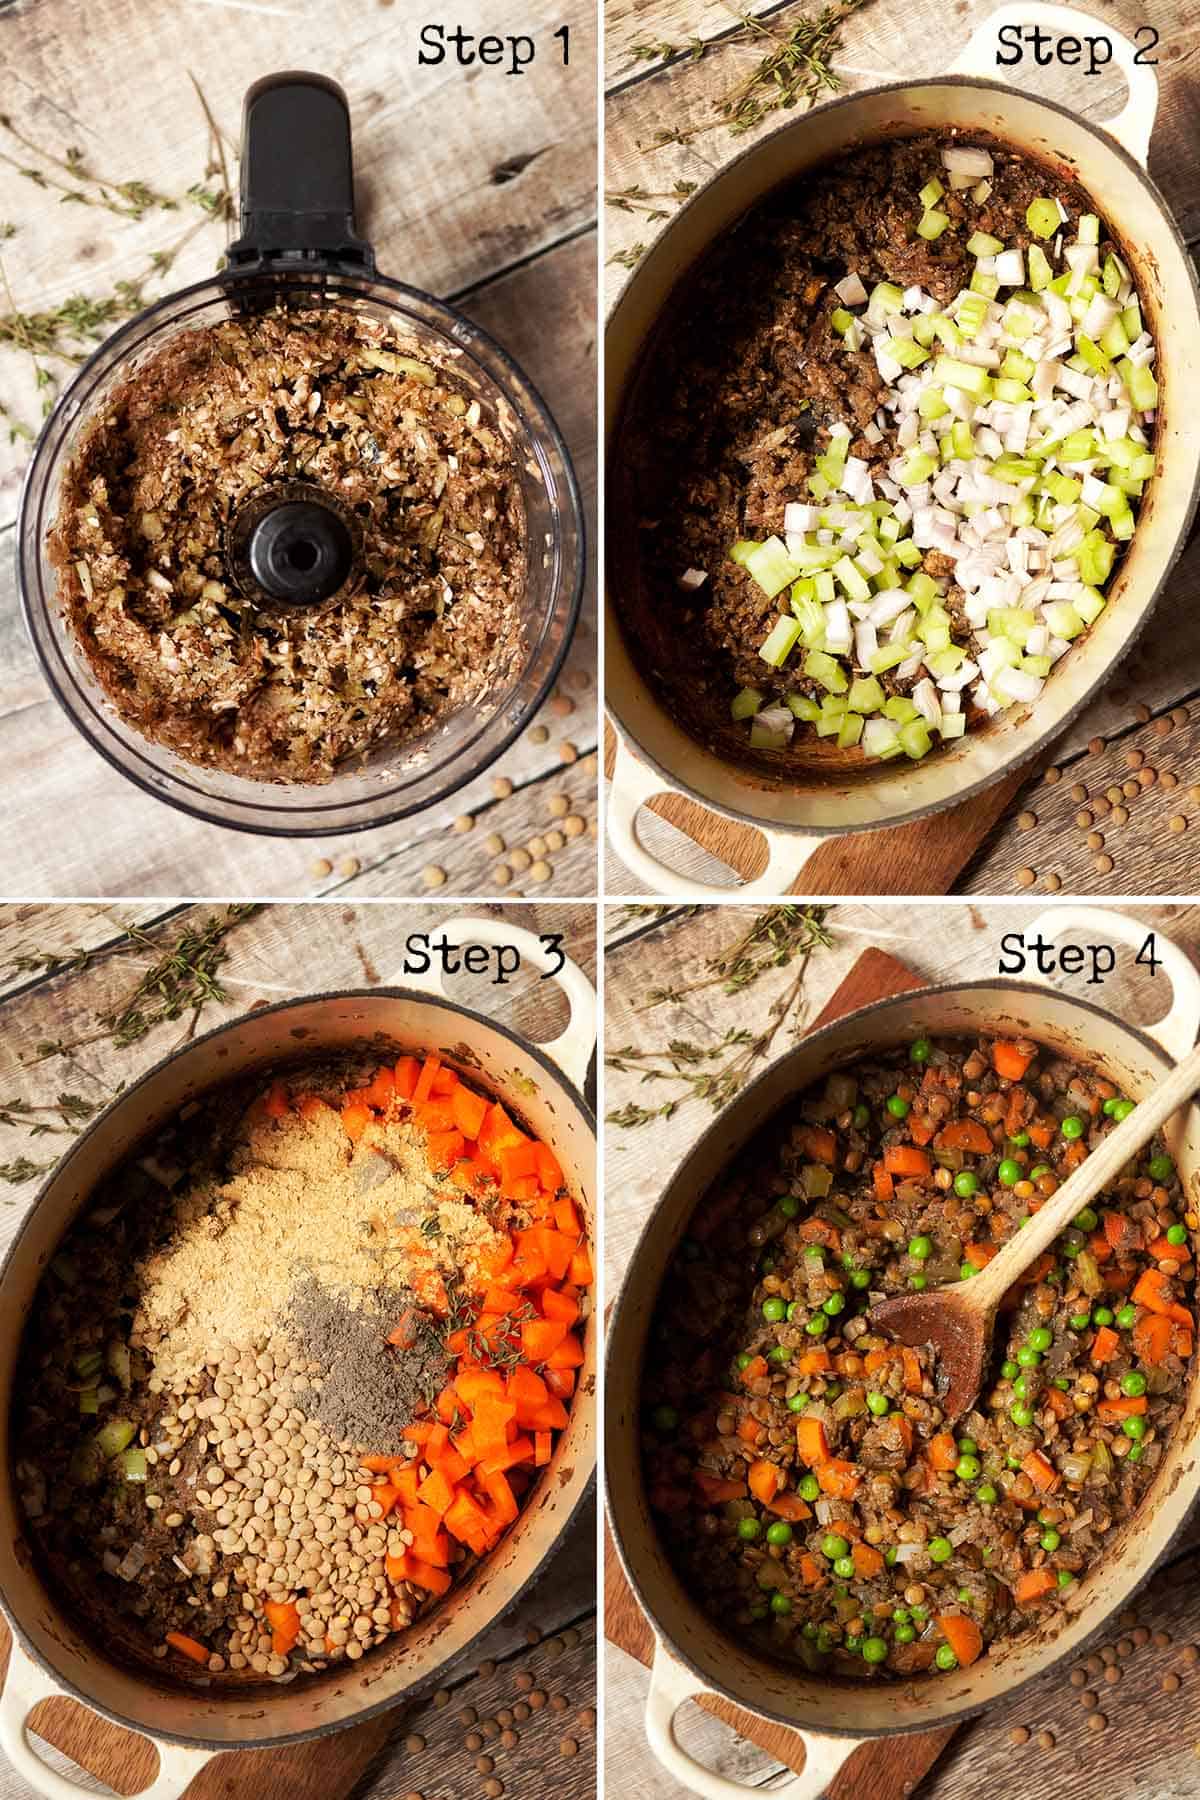 Collage of images showing a vegetarian stew being made